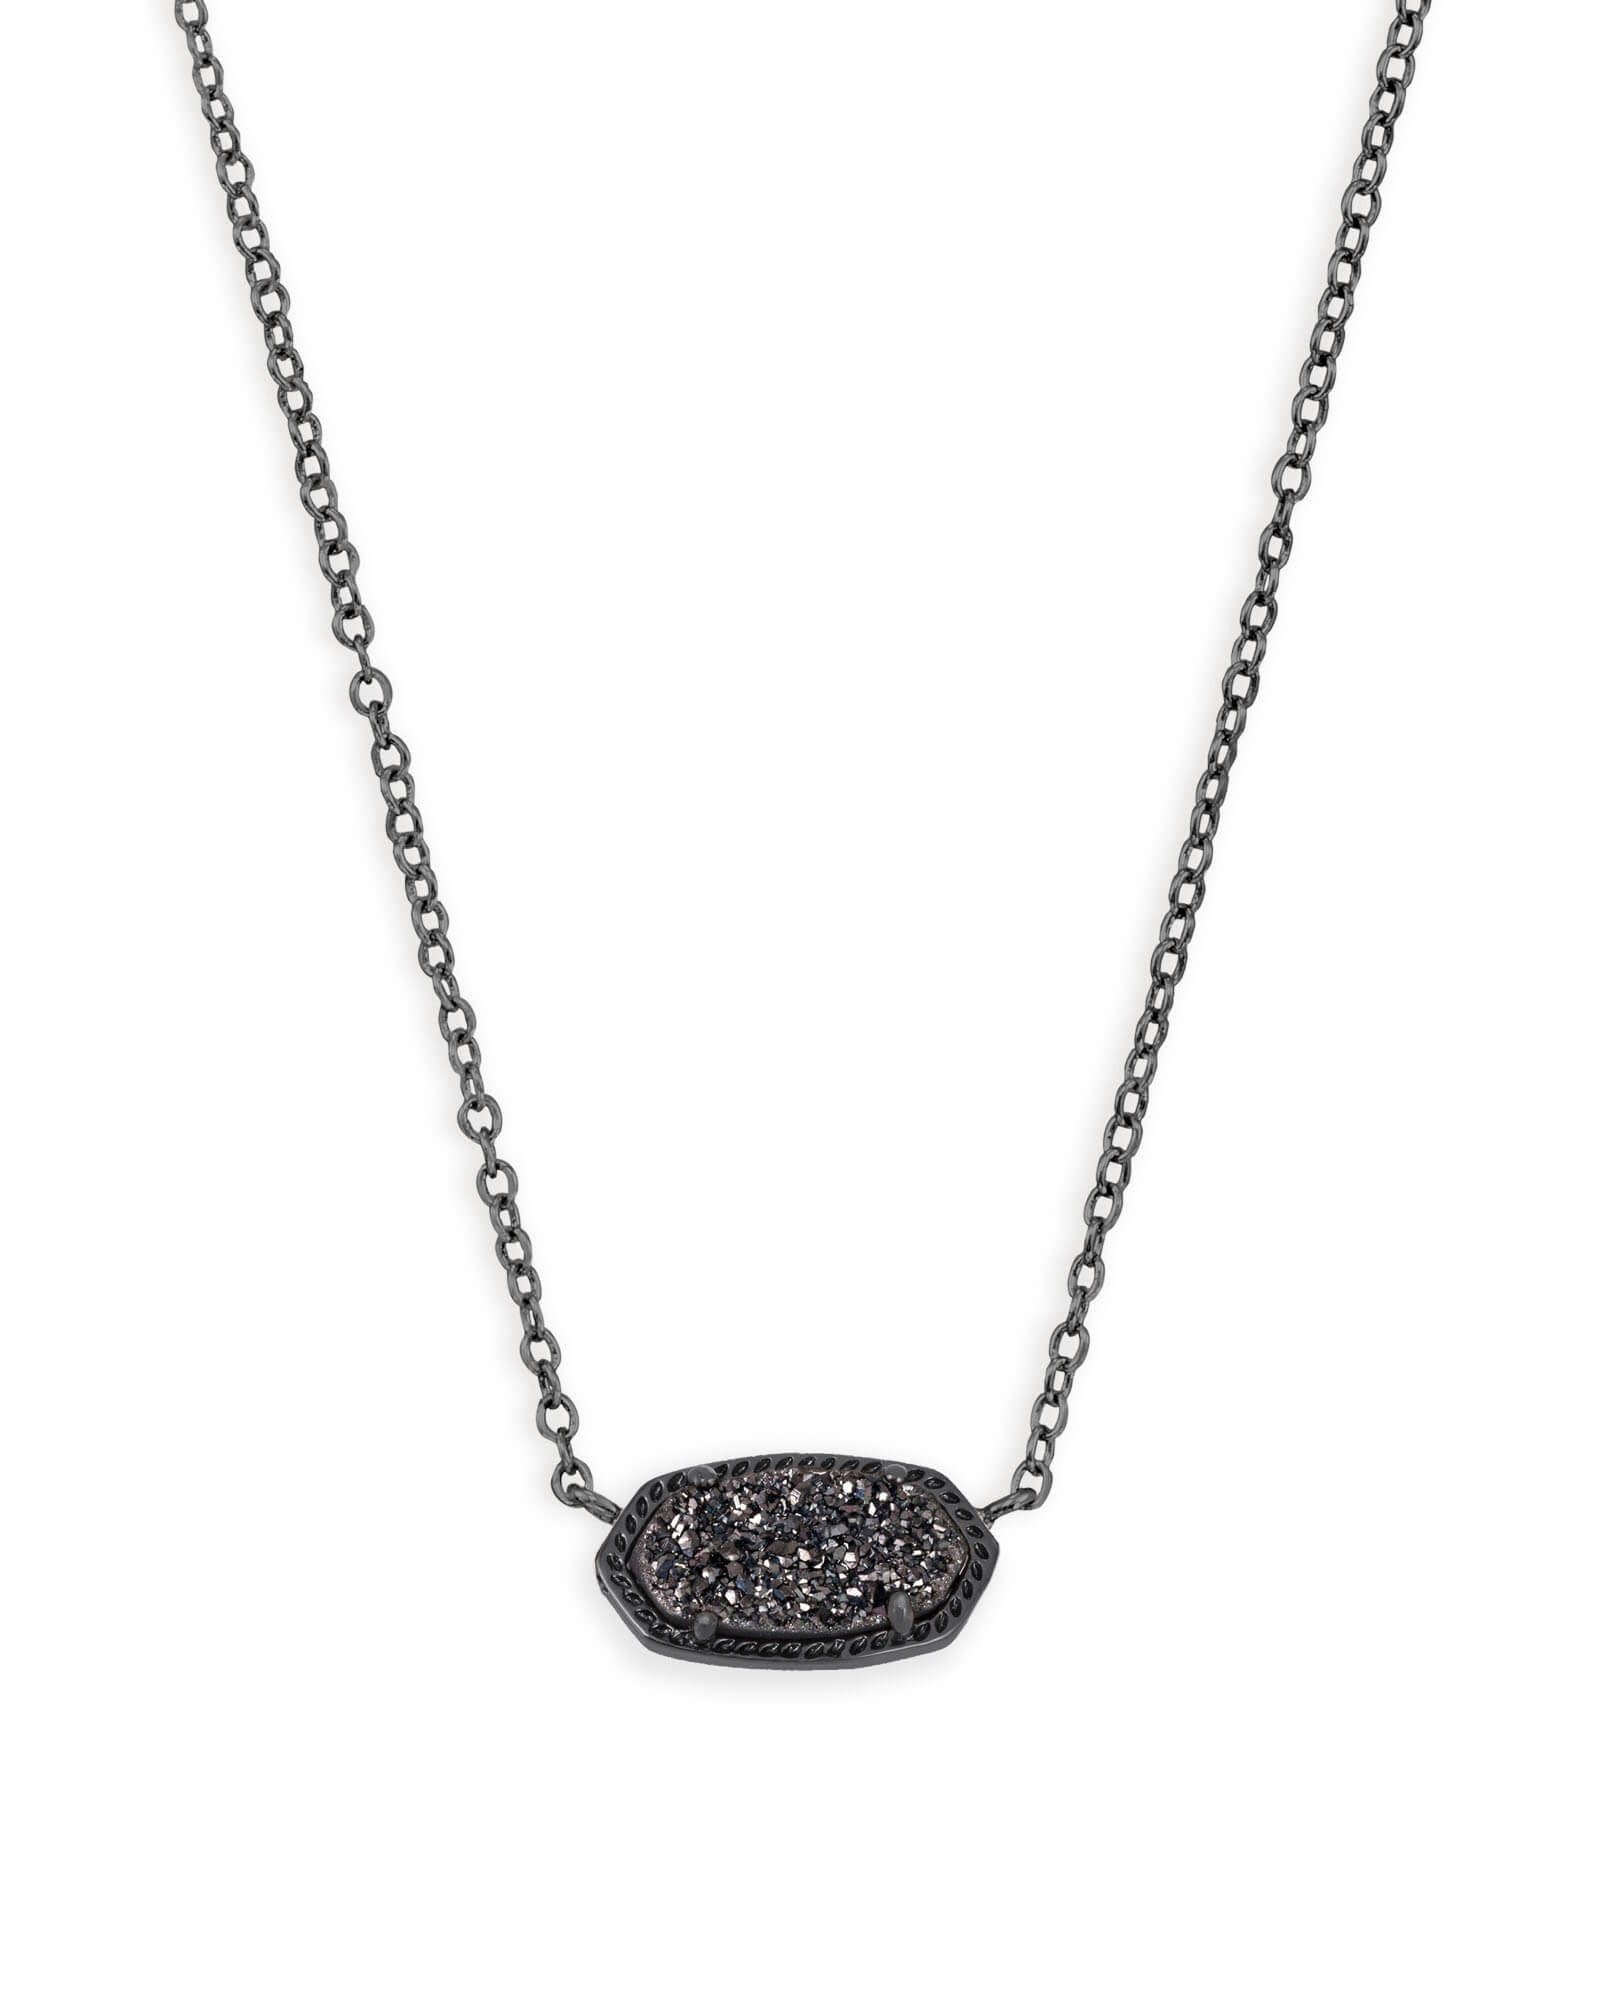 Antique Oxidized German Silver Black Metal Traditional Coin Choker Necklace  for Women and Girls at Rs 100/piece | Chokers in Ghaziabad | ID: 22203623497